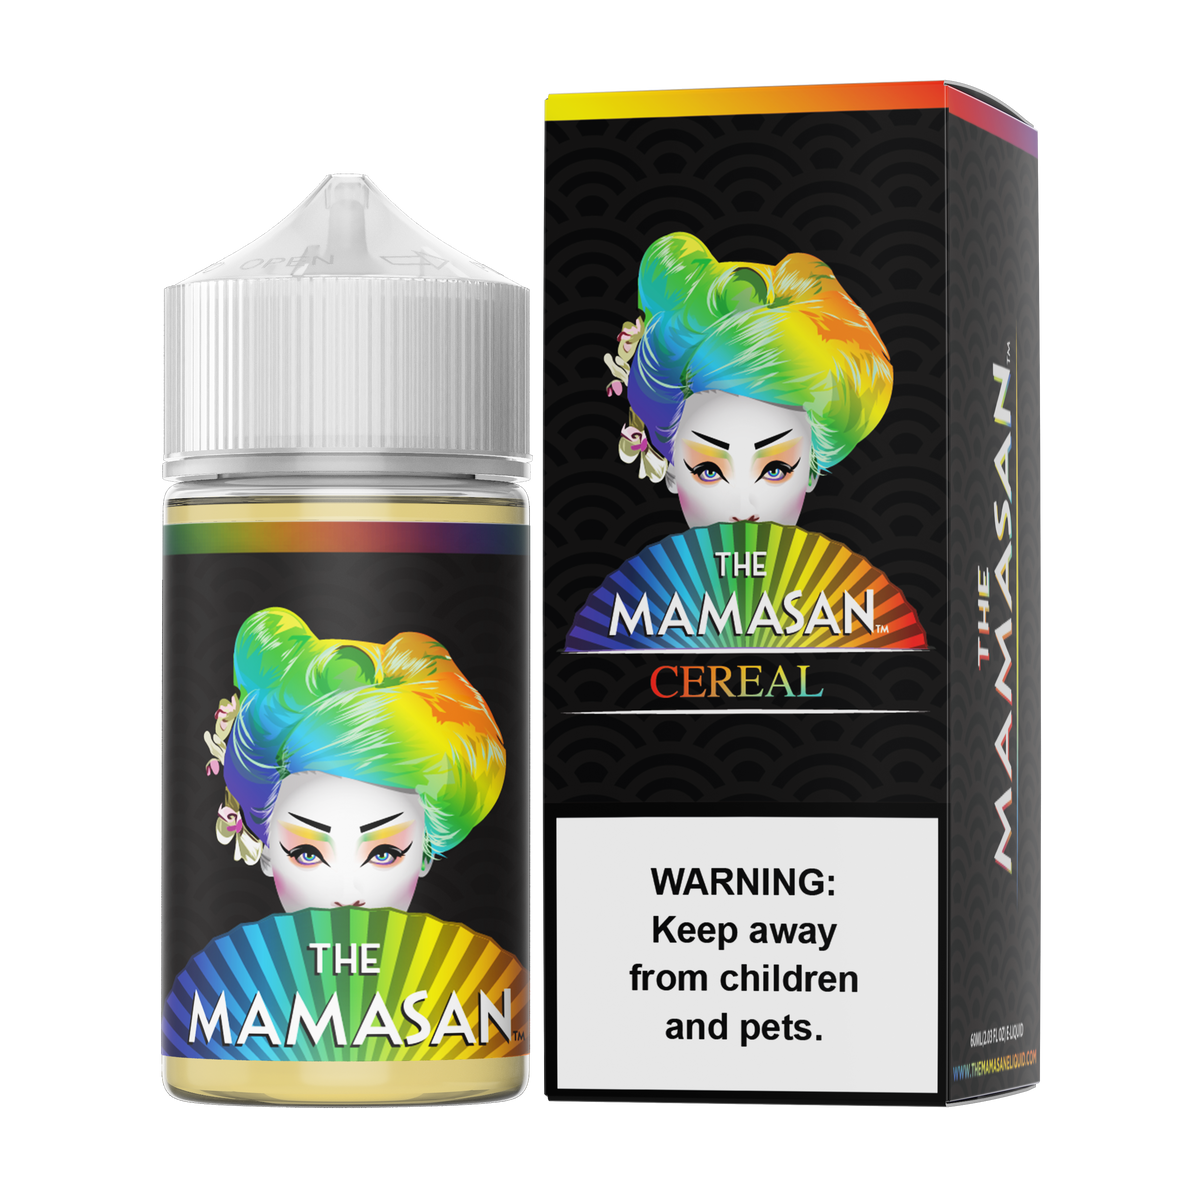 Cereal (Super Cereal) by The Mamasan Series 60mL with Packaging